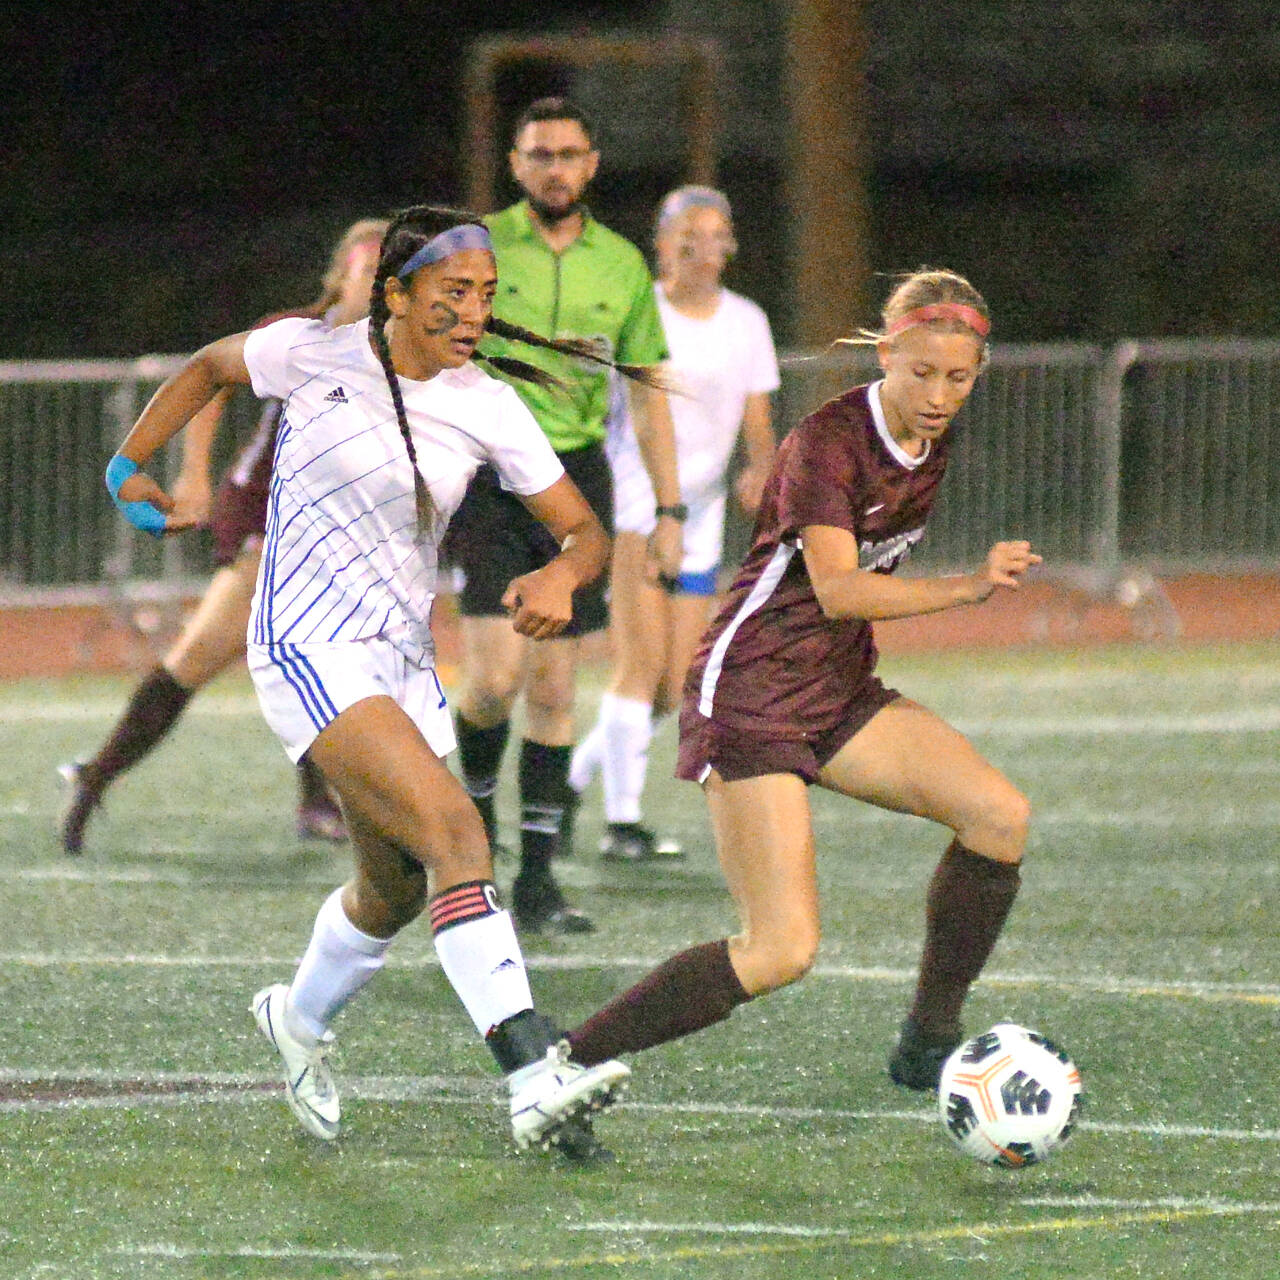 RYAN SPARKS | THE DAILY WORLD Elma midfielder Eliza Sibbett, left, passes while being defended by Montesano’s Lilly Causey during the Bulldogs’ 2-1 win on Tuesday in Montesano.